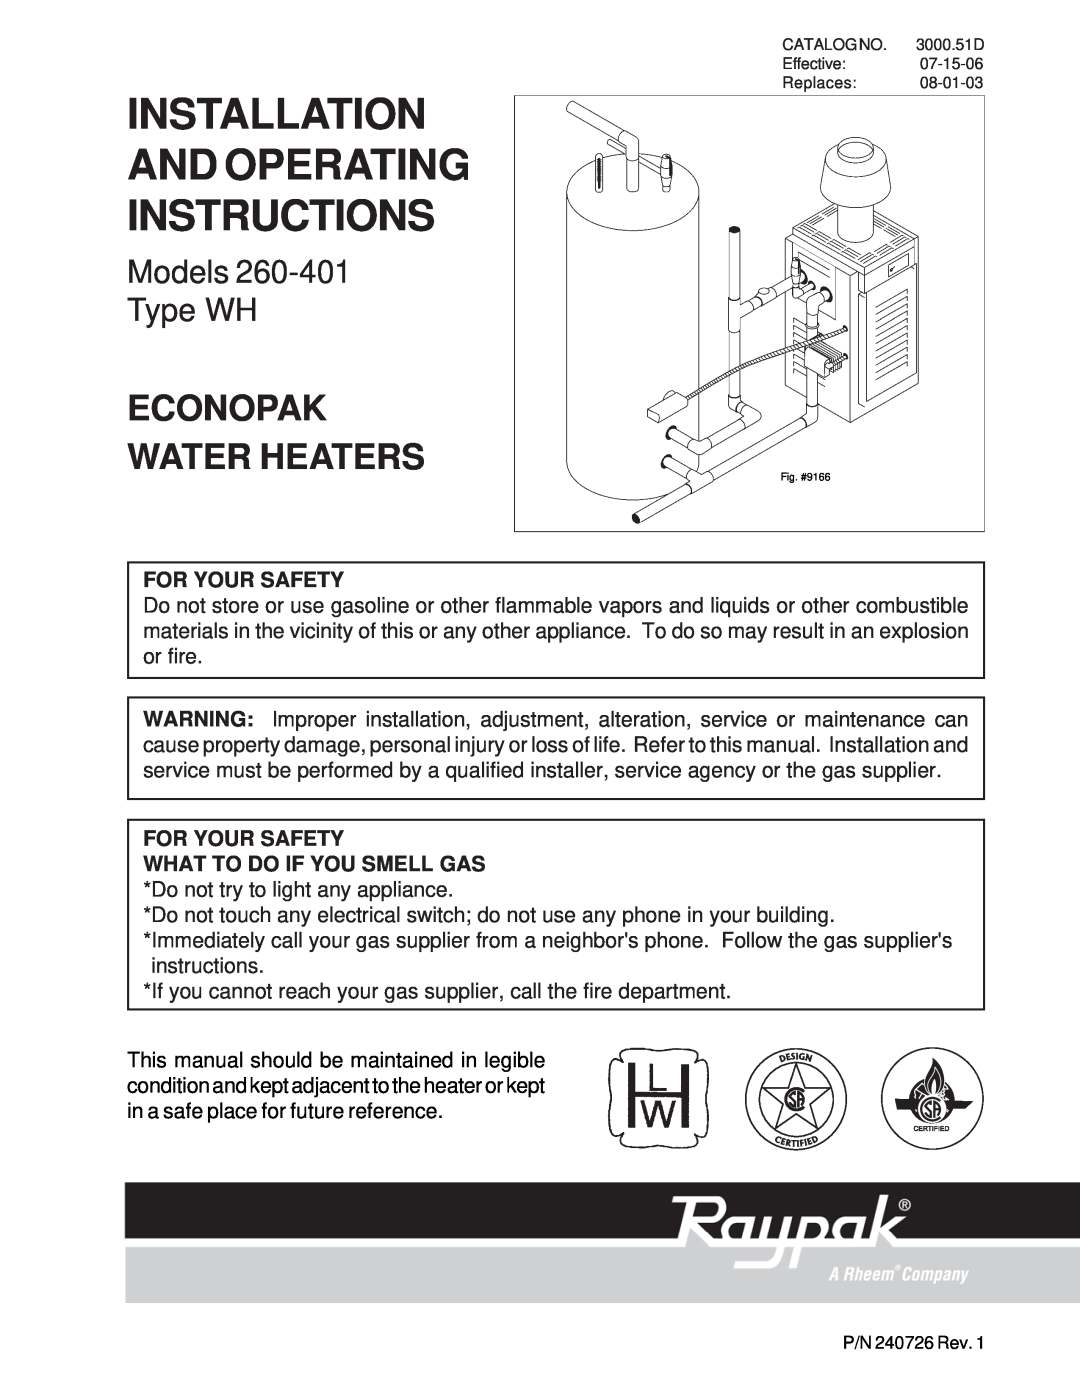 Raypak 260-401 manual For Your Safety, Installation And Operating Instructions, Econopak Water Heaters, Models Type WH 